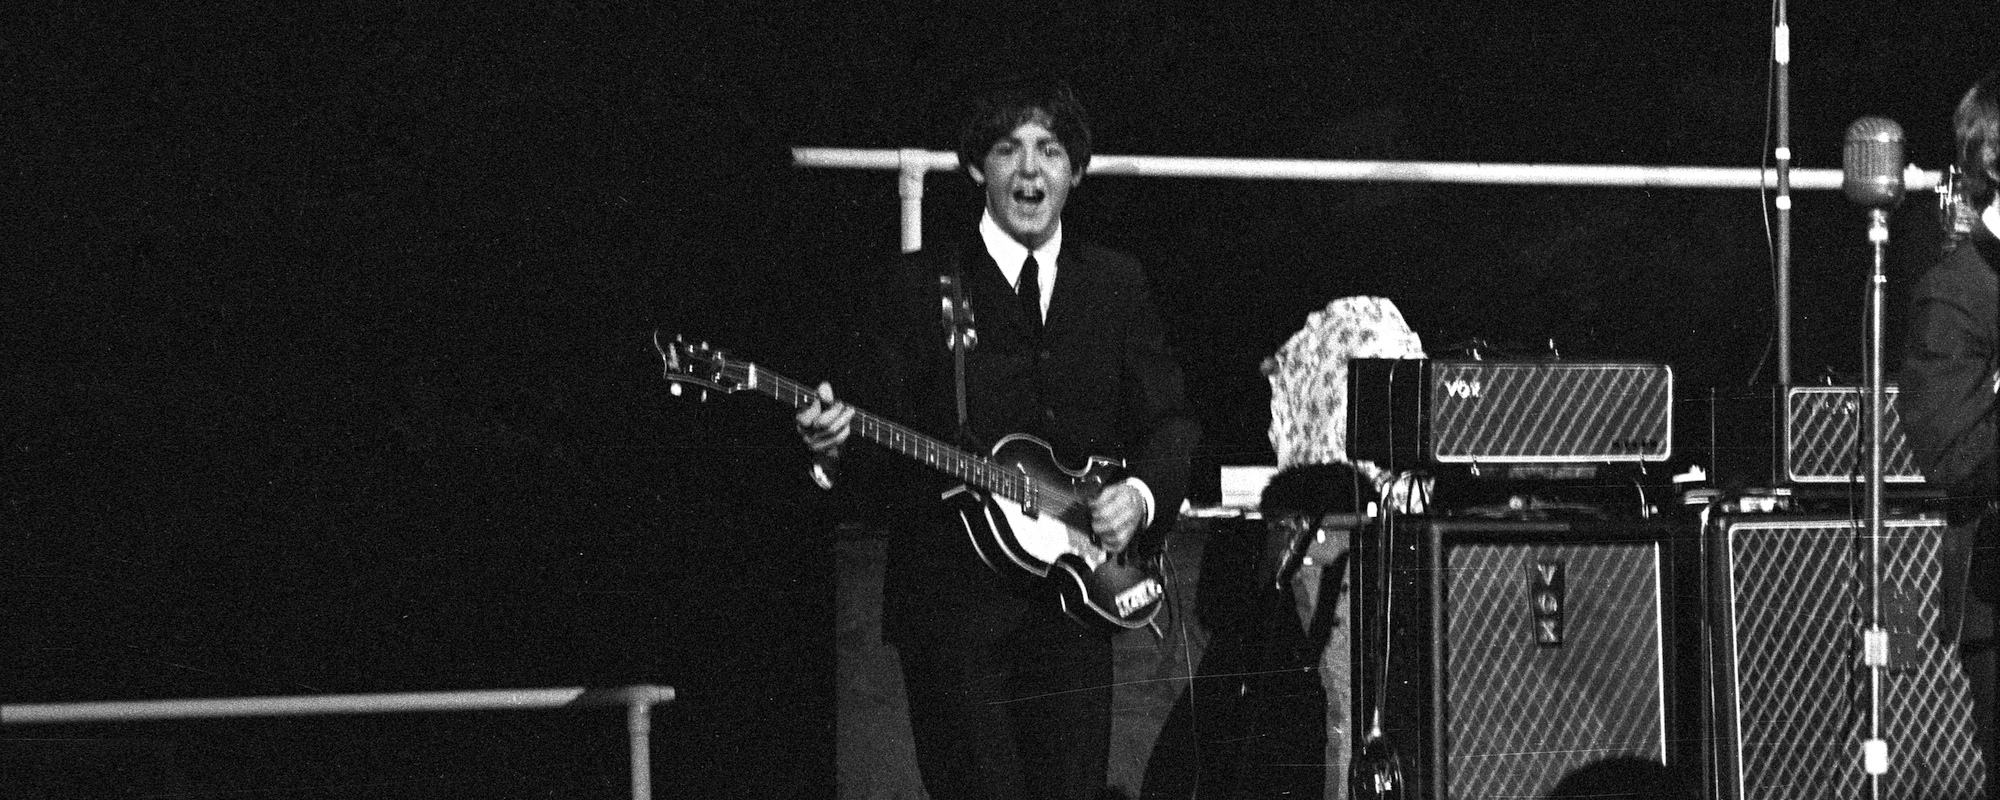 Remember When: The Beatles Make a Chaotic Arrival In the United States